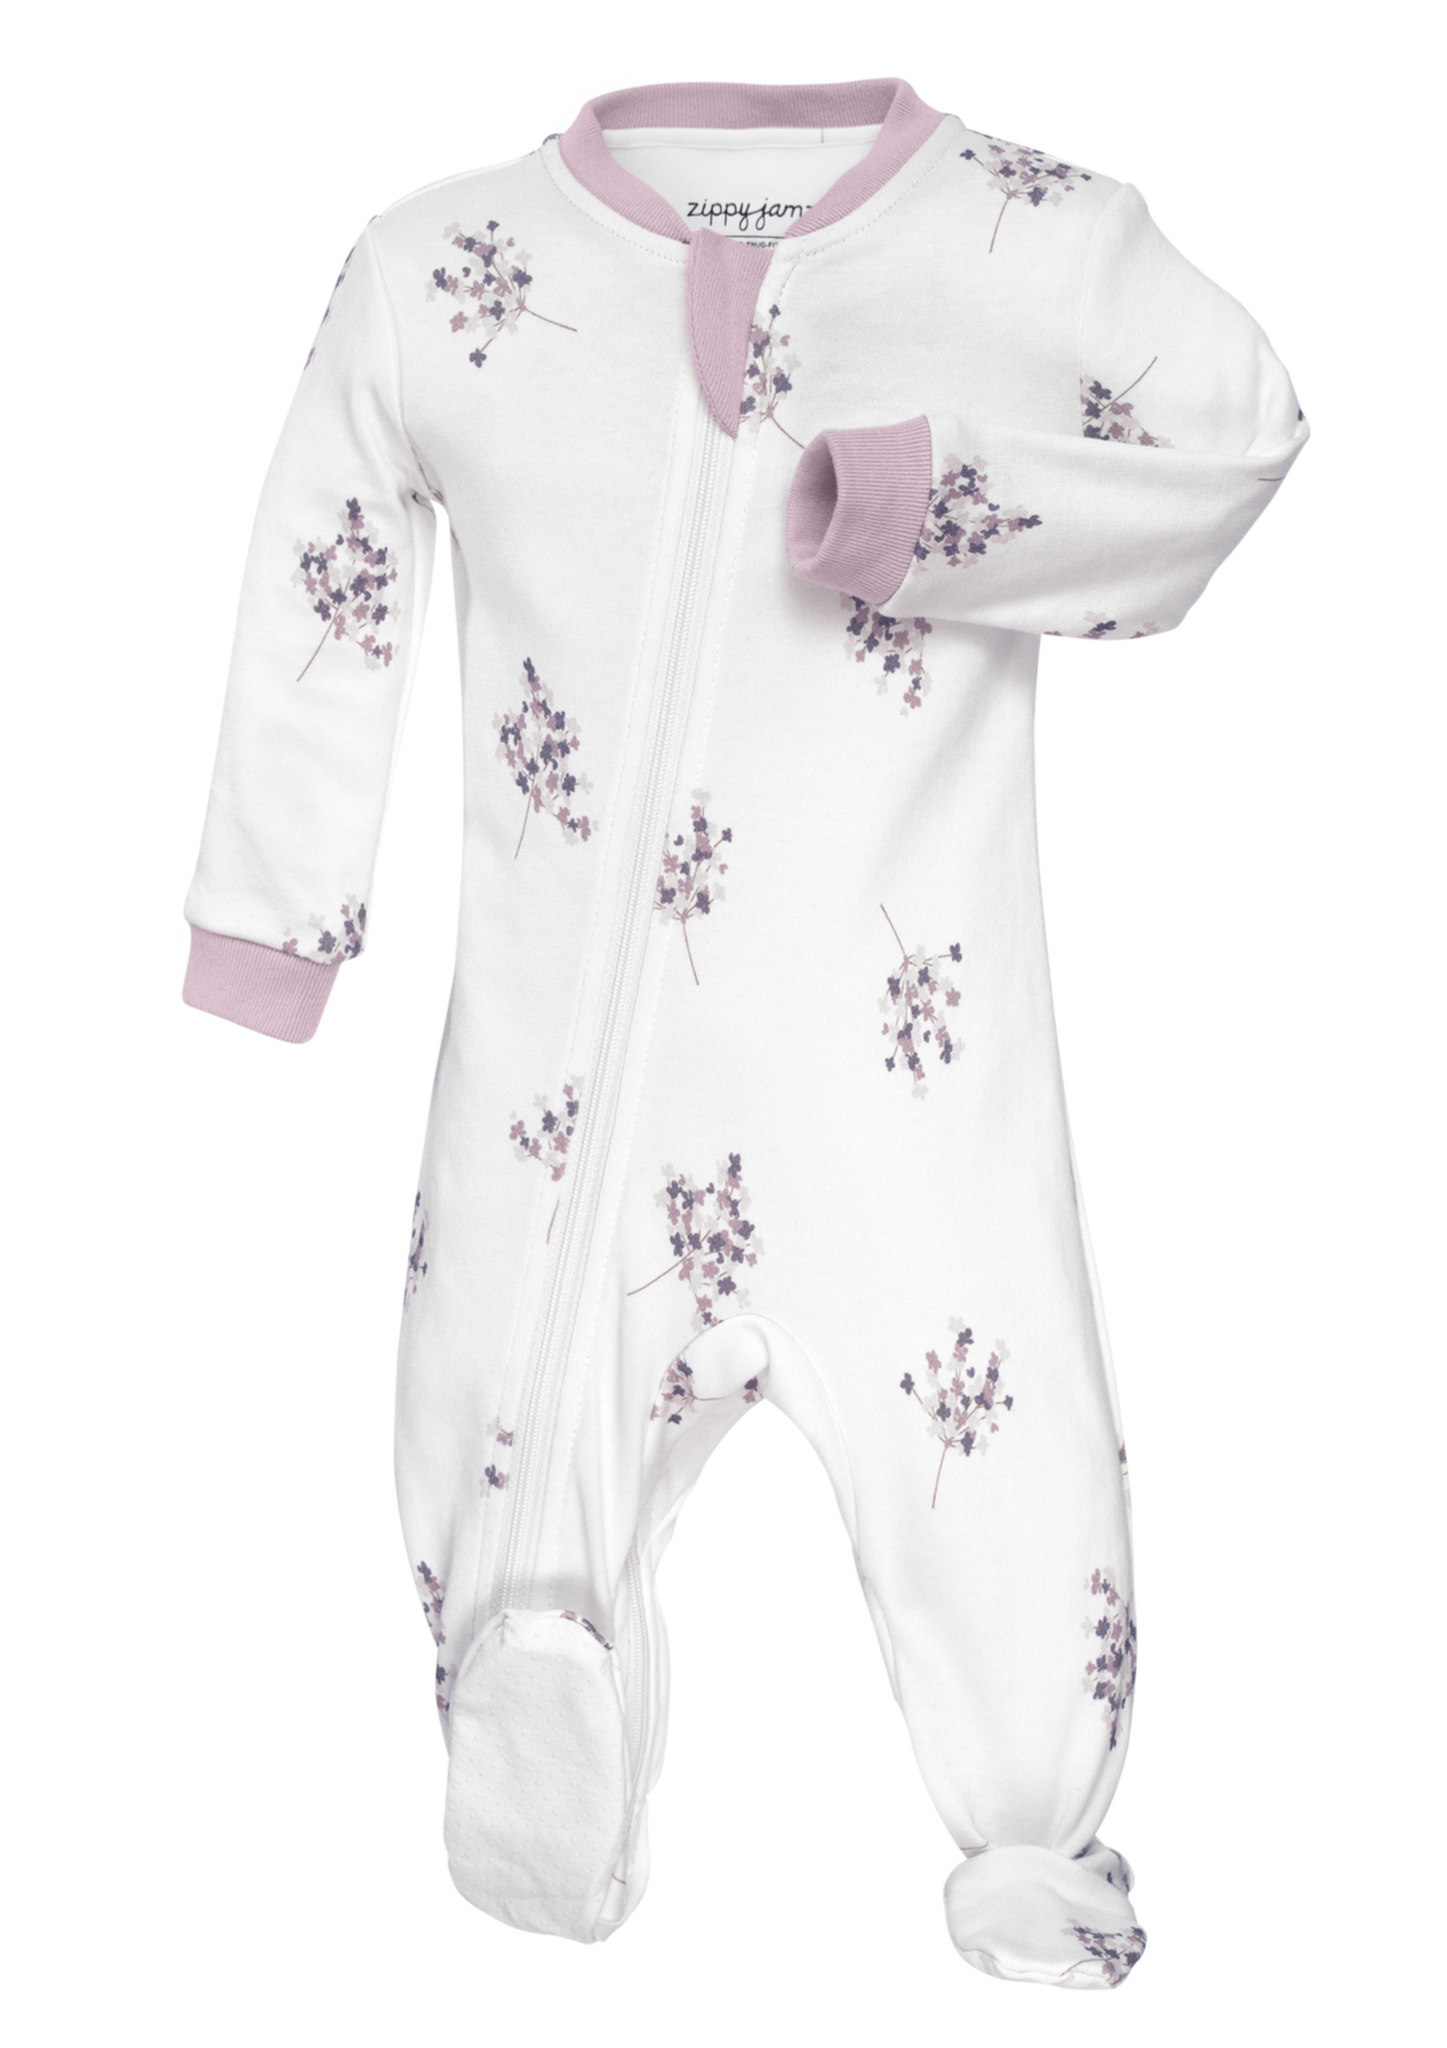 UNIKONCEPT Lifestyle Boutique and Lounge; Zippy jamz Footed Spring Blossom baby pyjamas